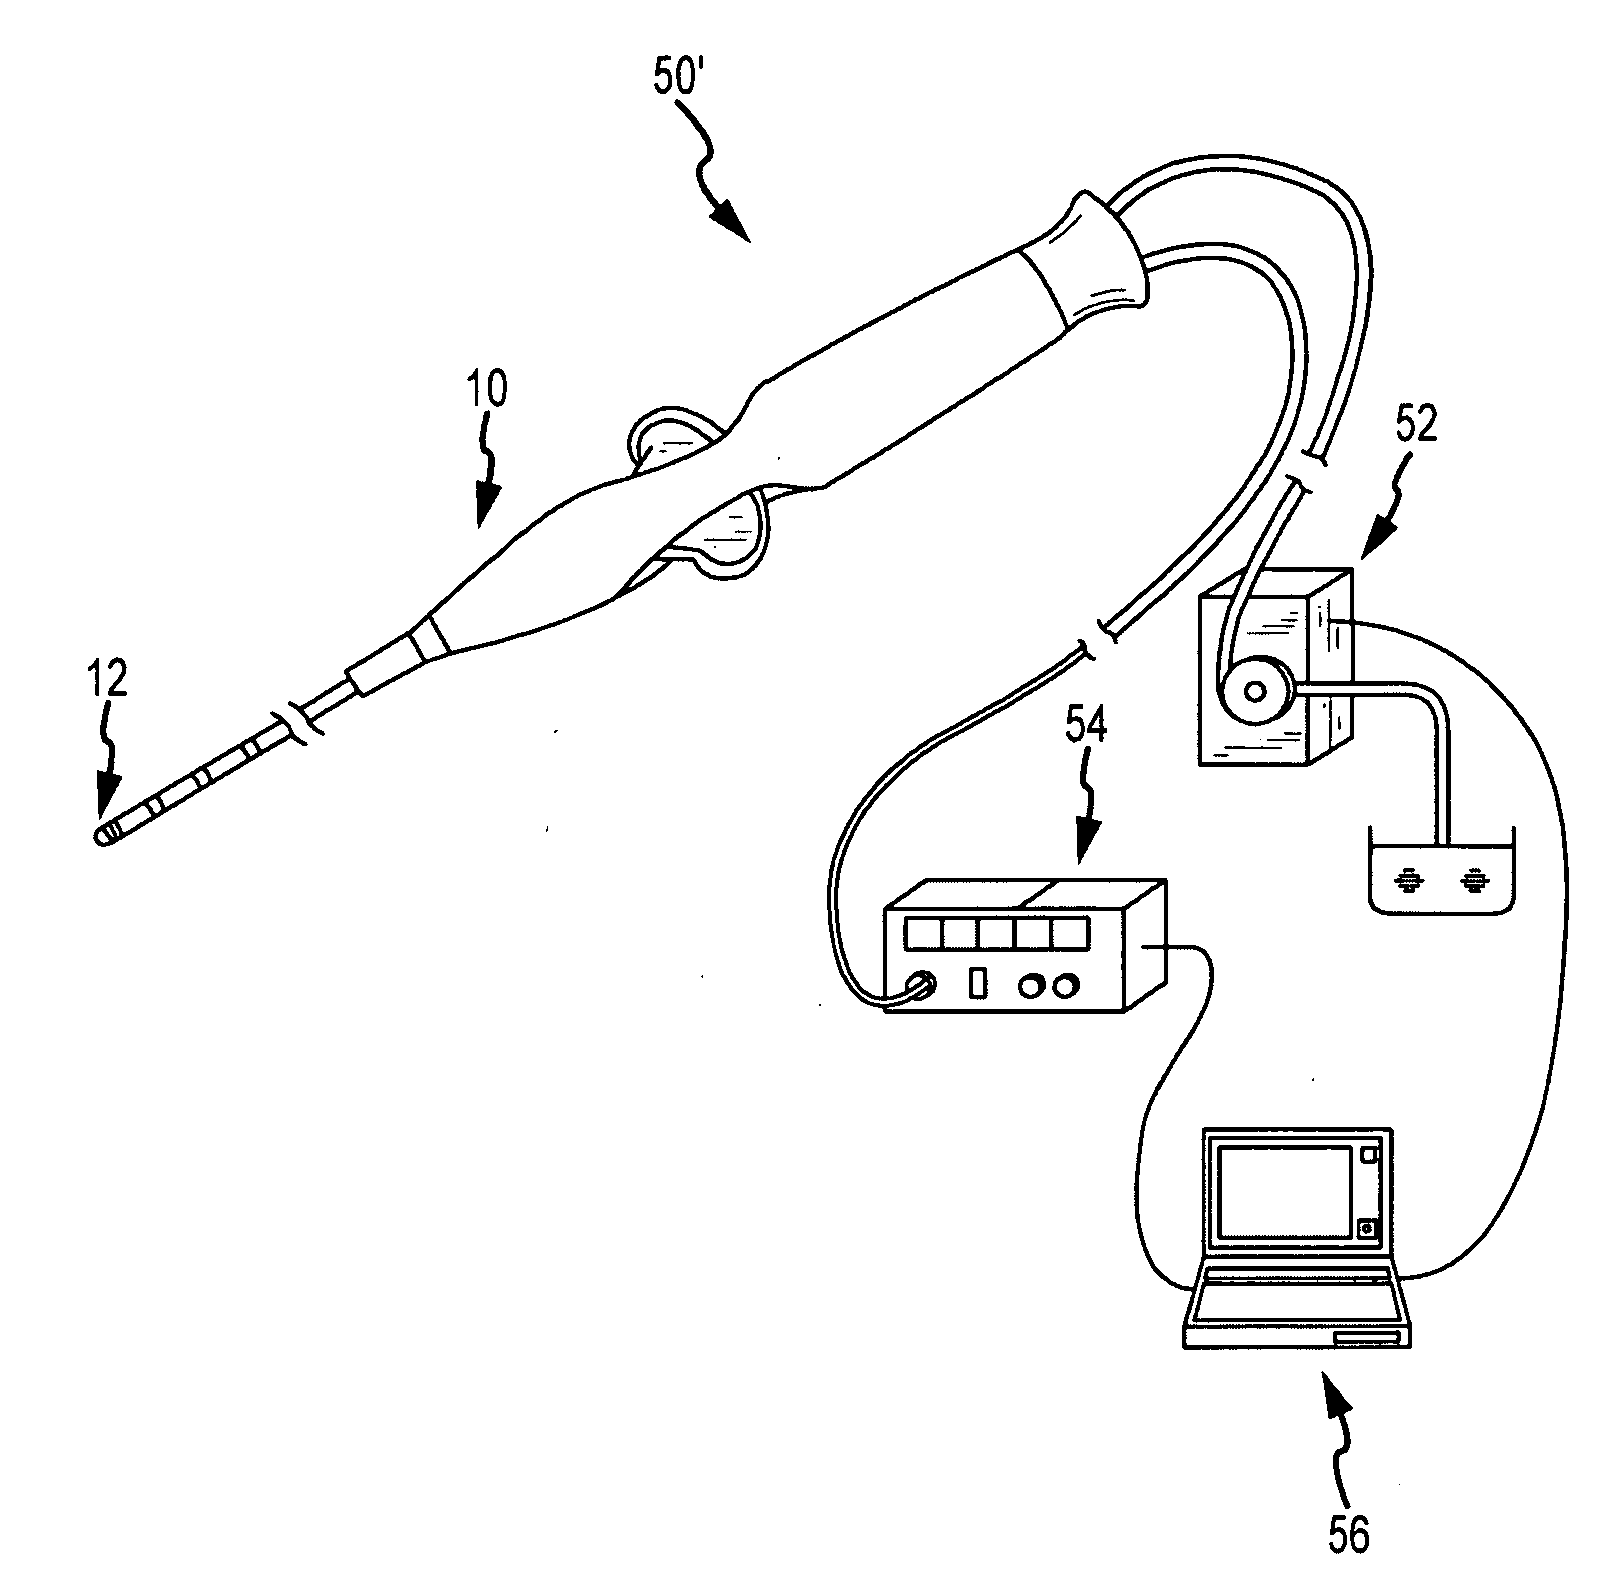 Controlled irrigated catheter ablation systems and methods thereof